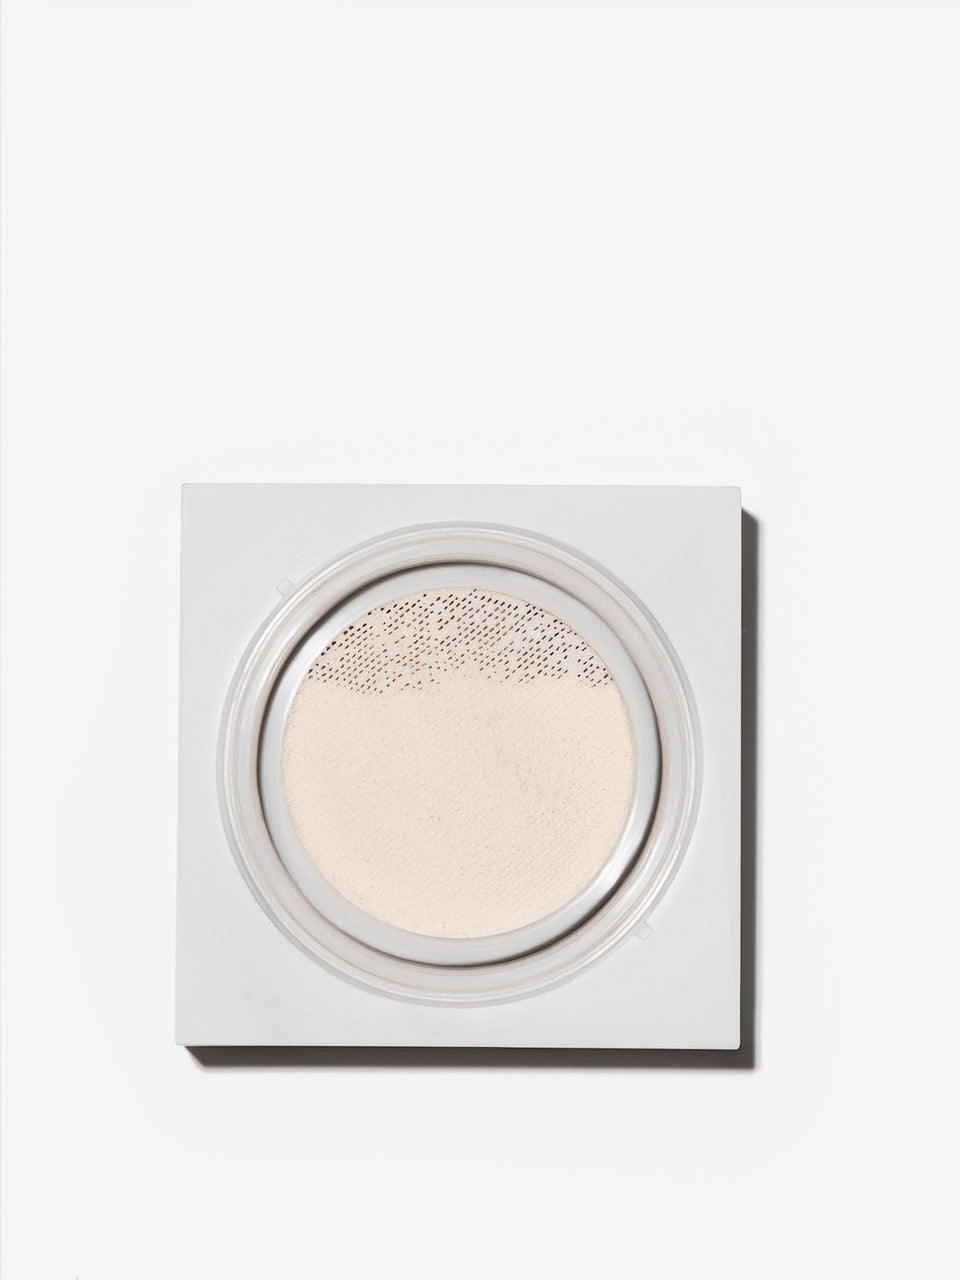 FRONT IMAGE OF REFY SKIN FINISH IN SHADE 01. TRANSLUCENT POWDER WITH YELLOW UNDERTONE